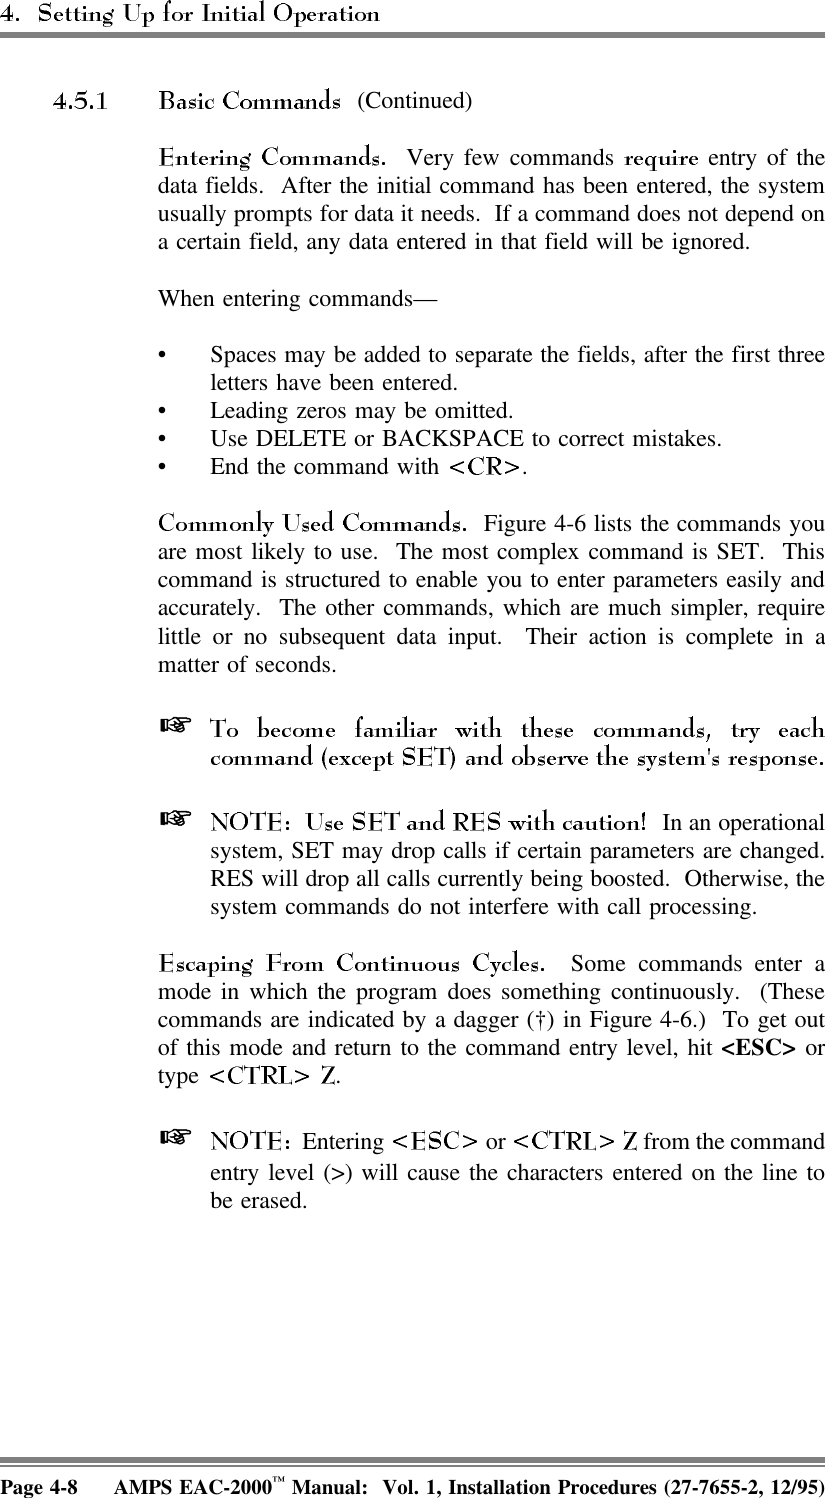  (Continued) Very few commands   entry of thedata fields.  After the initial command has been entered, the systemusually prompts for data it needs.  If a command does not depend ona certain field, any data entered in that field will be ignored. When entering commands—• Spaces may be added to separate the fields, after the first threeletters have been entered.• Leading zeros may be omitted.• Use DELETE or BACKSPACE to correct mistakes.• End the command with  .  Figure 4-6 lists the commands youare most likely to use.  The most complex command is SET.  Thiscommand is structured to enable you to enter parameters easily andaccurately.  The other commands, which are much simpler, requirelittle or no subsequent data input.  Their action is complete in amatter of seconds.   In an operationalsystem, SET may drop calls if certain parameters are changed.RES will drop all calls currently being boosted.  Otherwise, thesystem commands do not interfere with call processing.  Some commands enter amode in which the program does something continuously.  (Thesecommands are indicated by a dagger (†) in Figure 4-6.)  To get outof this mode and return to the command entry level, hit &lt;ESC&gt; ortype  .   Entering   or   from the commandentry level (&gt;) will cause the characters entered on the line tobe erased. Page 4-8 AMPS EAC-2000™ Manual:  Vol. 1, Installation Procedures (27-7655-2, 12/95)